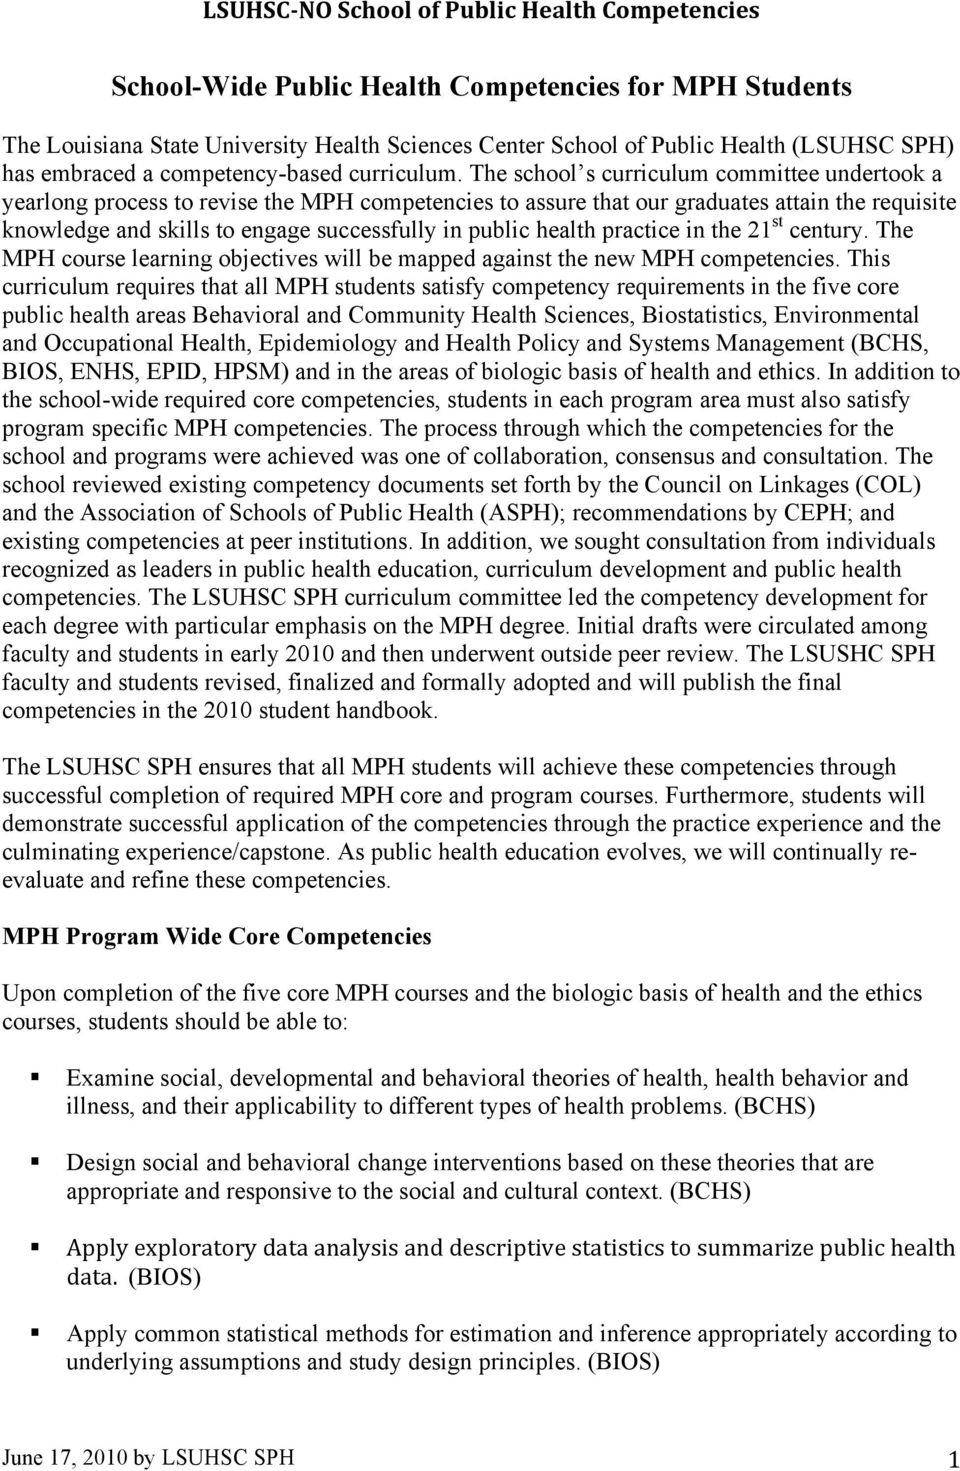 health practice in the 21 st century. The MPH course learning objectives will be mapped against the new MPH competencies.